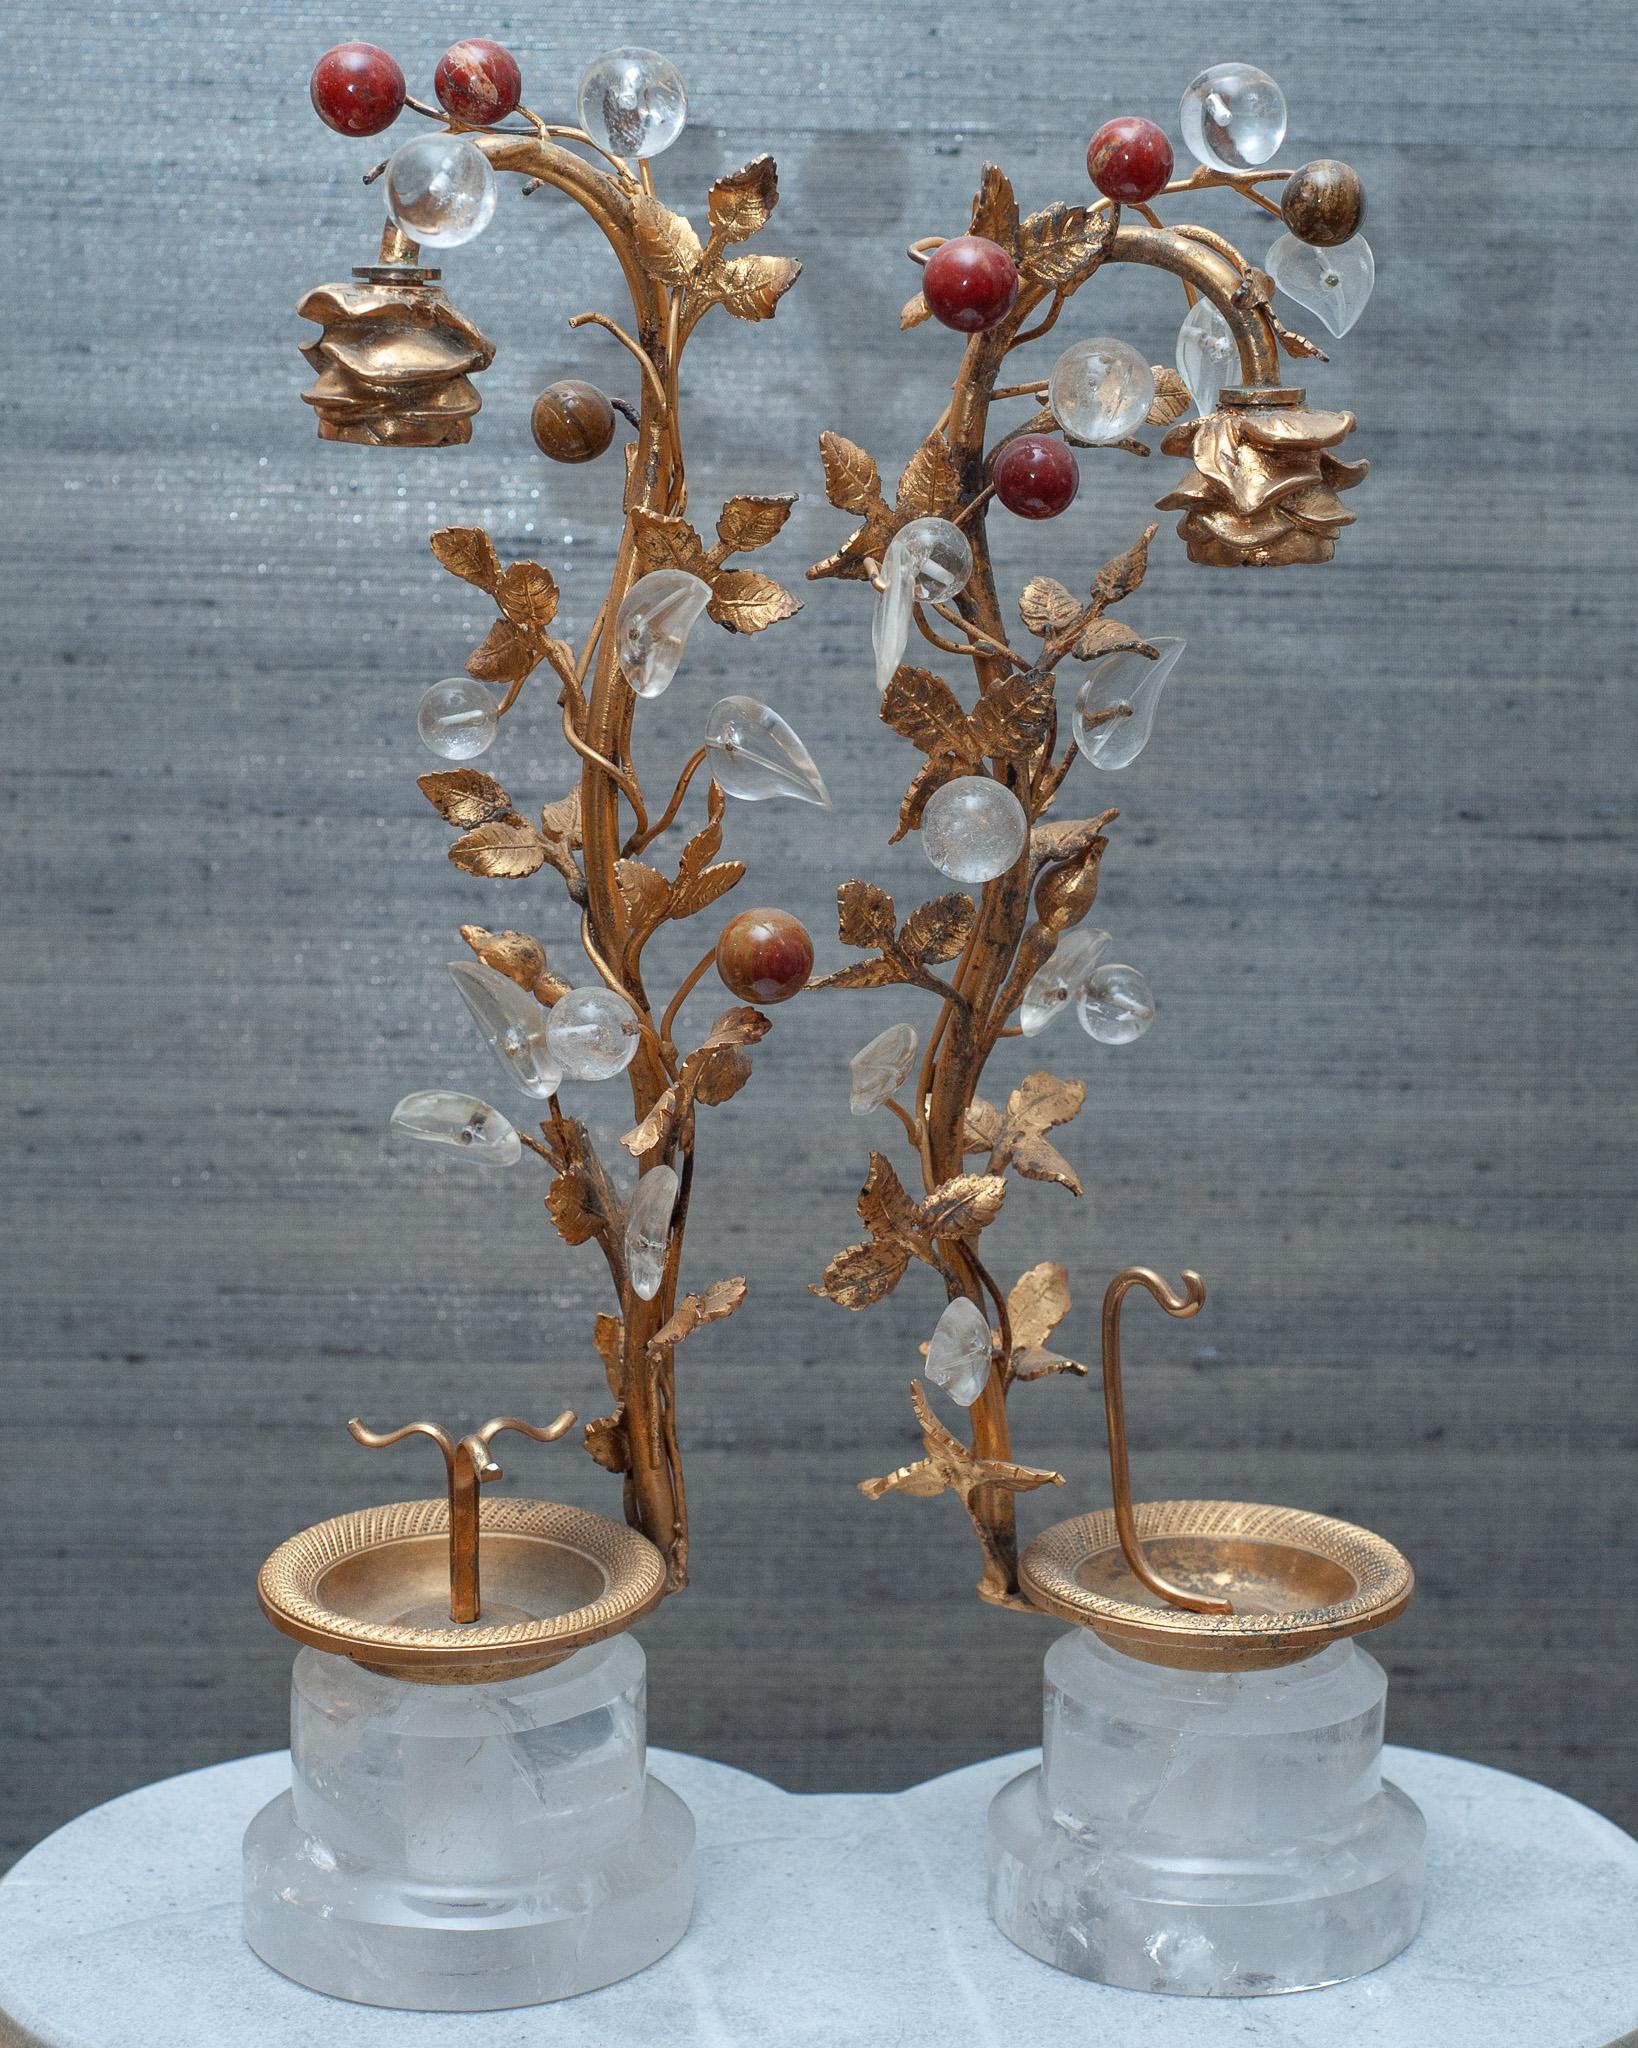 A stunning and exceptional pair of antique French gilt bronze tree objets, on rock crystal bases with rock crystal leaves, with semi-precious stone fruits in carnelian and tigers eye stone. An unusual and rare pair of objet, these are sure to be a